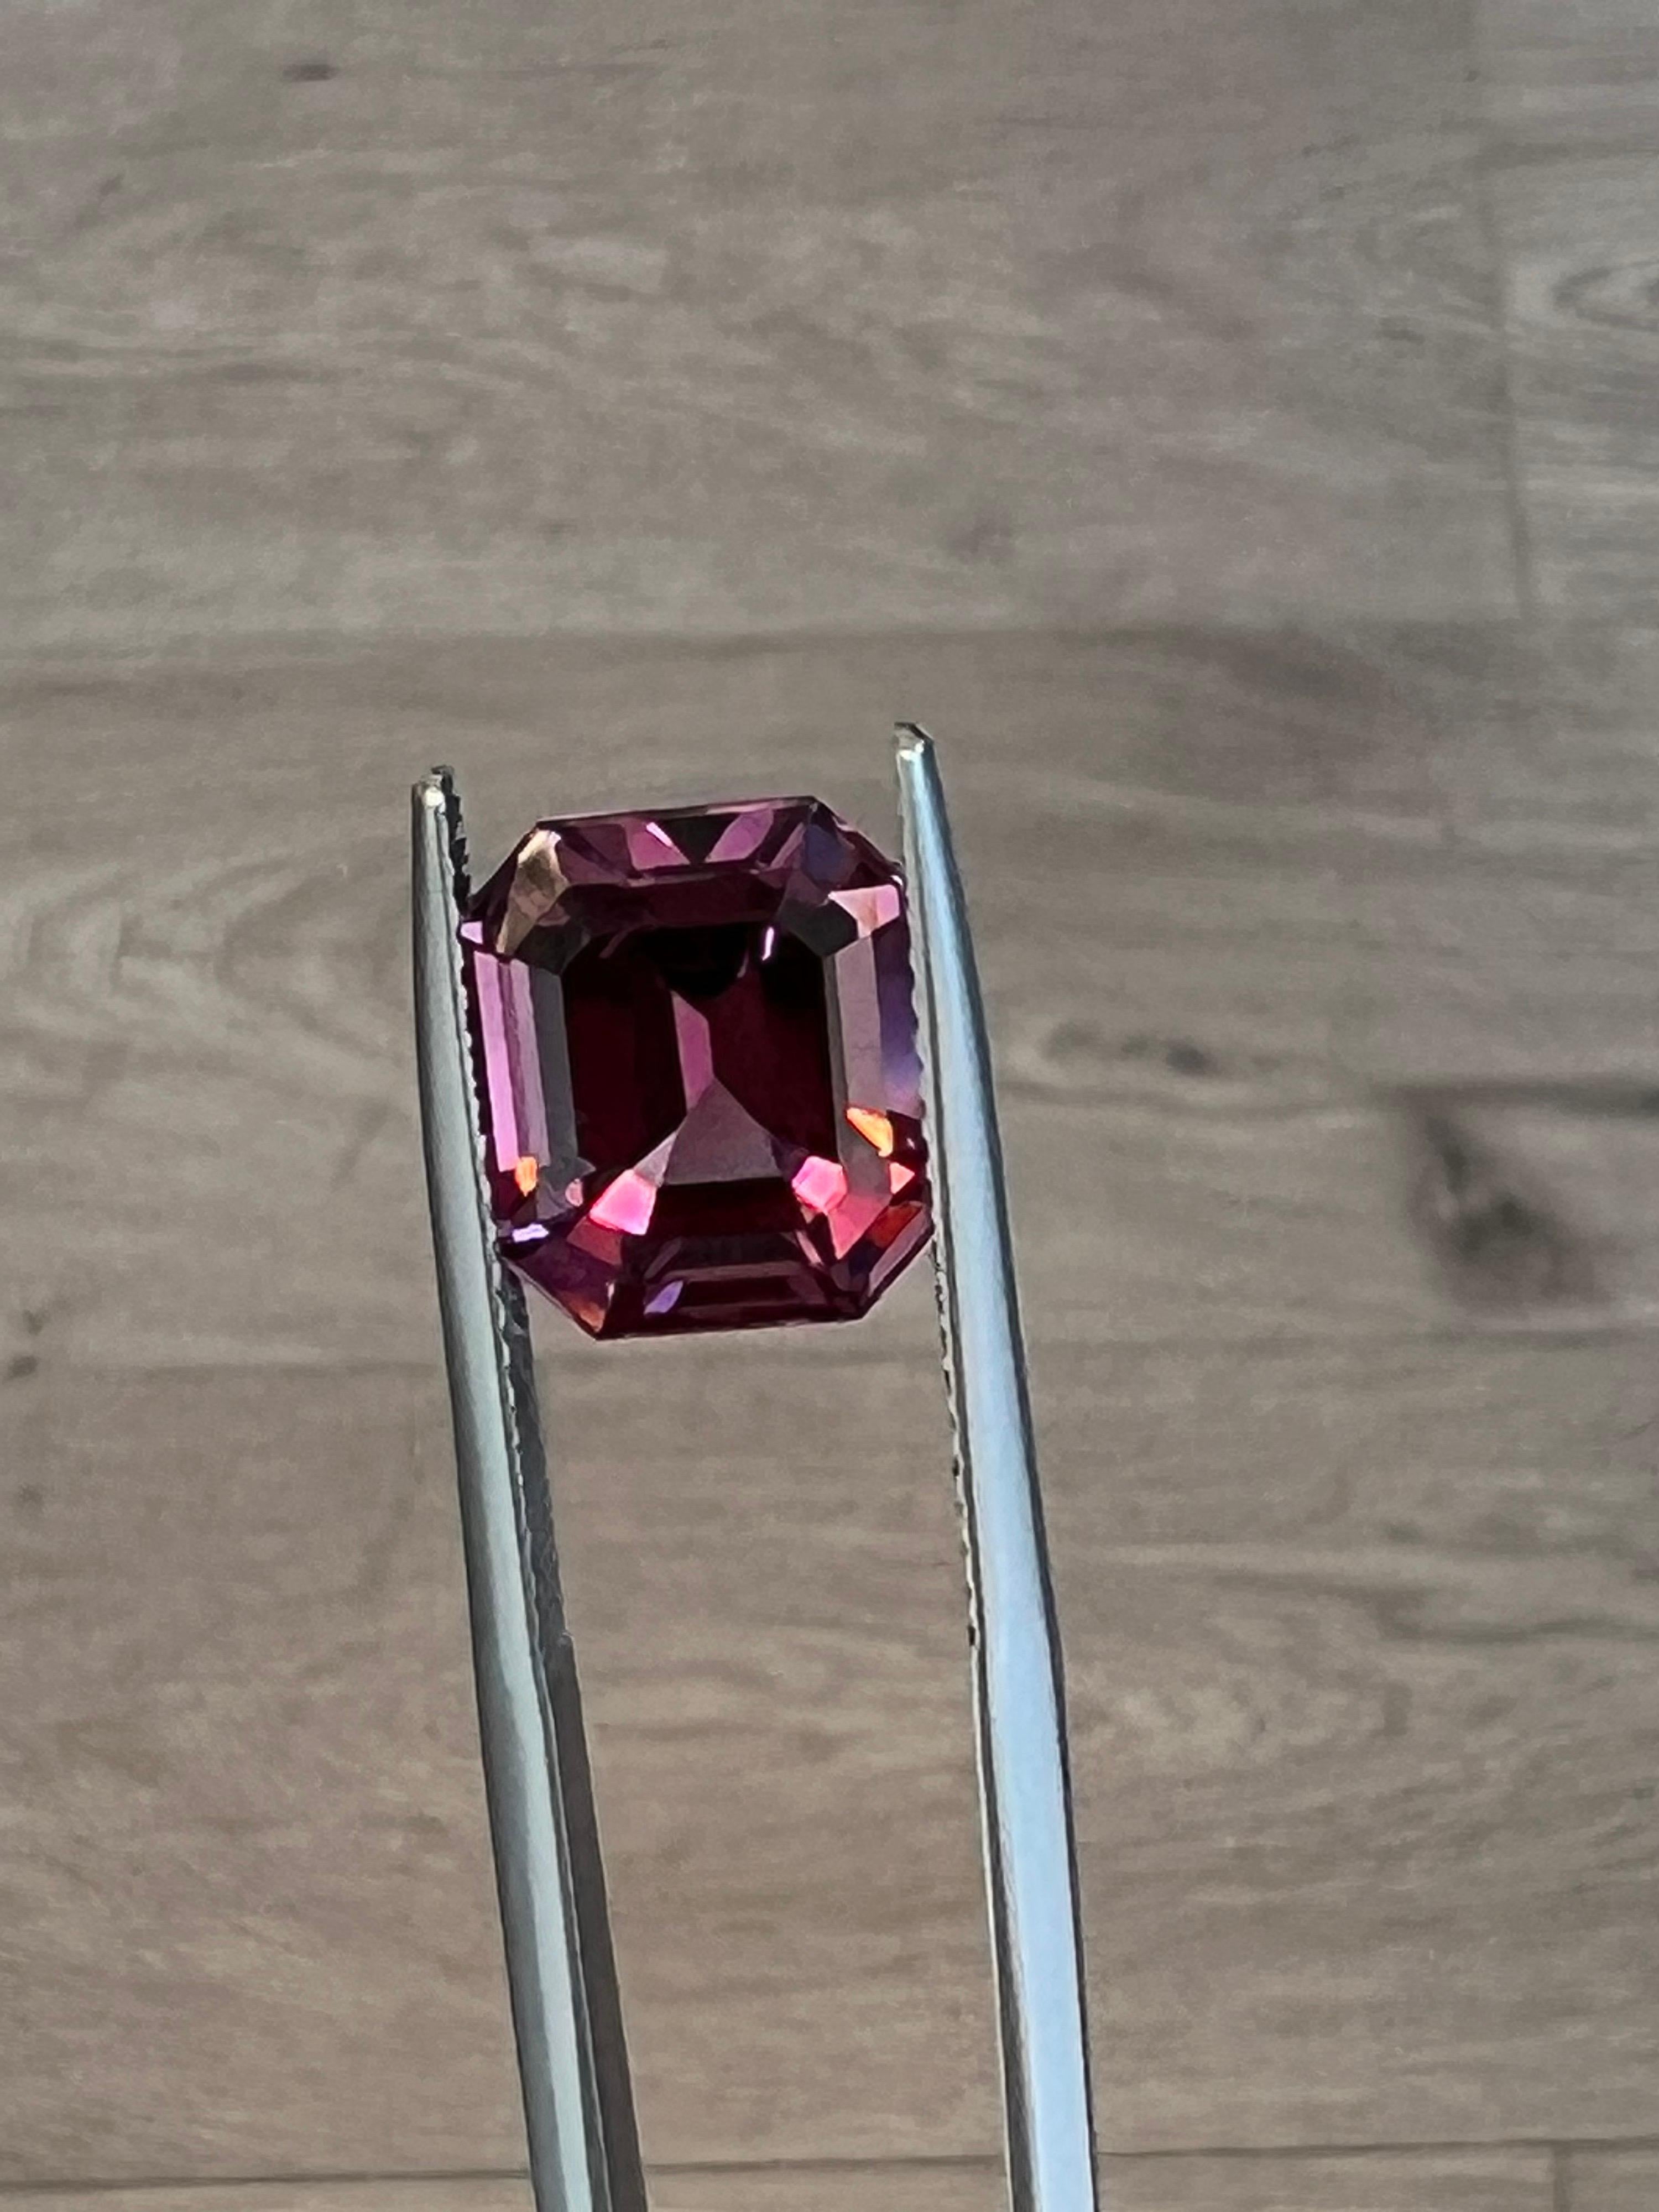 Women's or Men's Pink Spinel Ring Gem 6.04 Carat Emerald Cut Loose Gemstone Loupe Clean For Sale